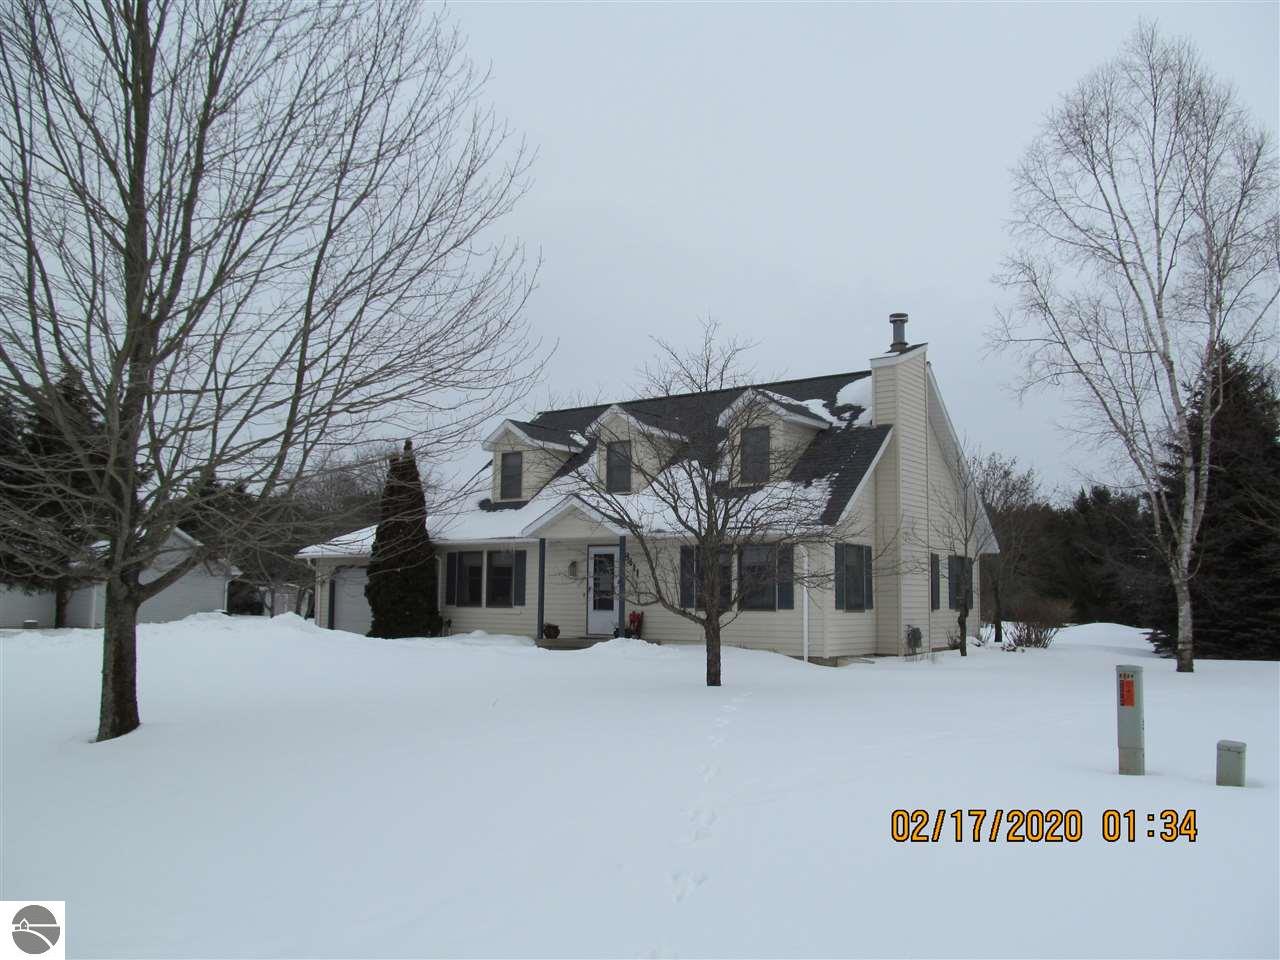 8411 Valley Forge Drive, Cadillac, MI 49601 photo 2 of 40